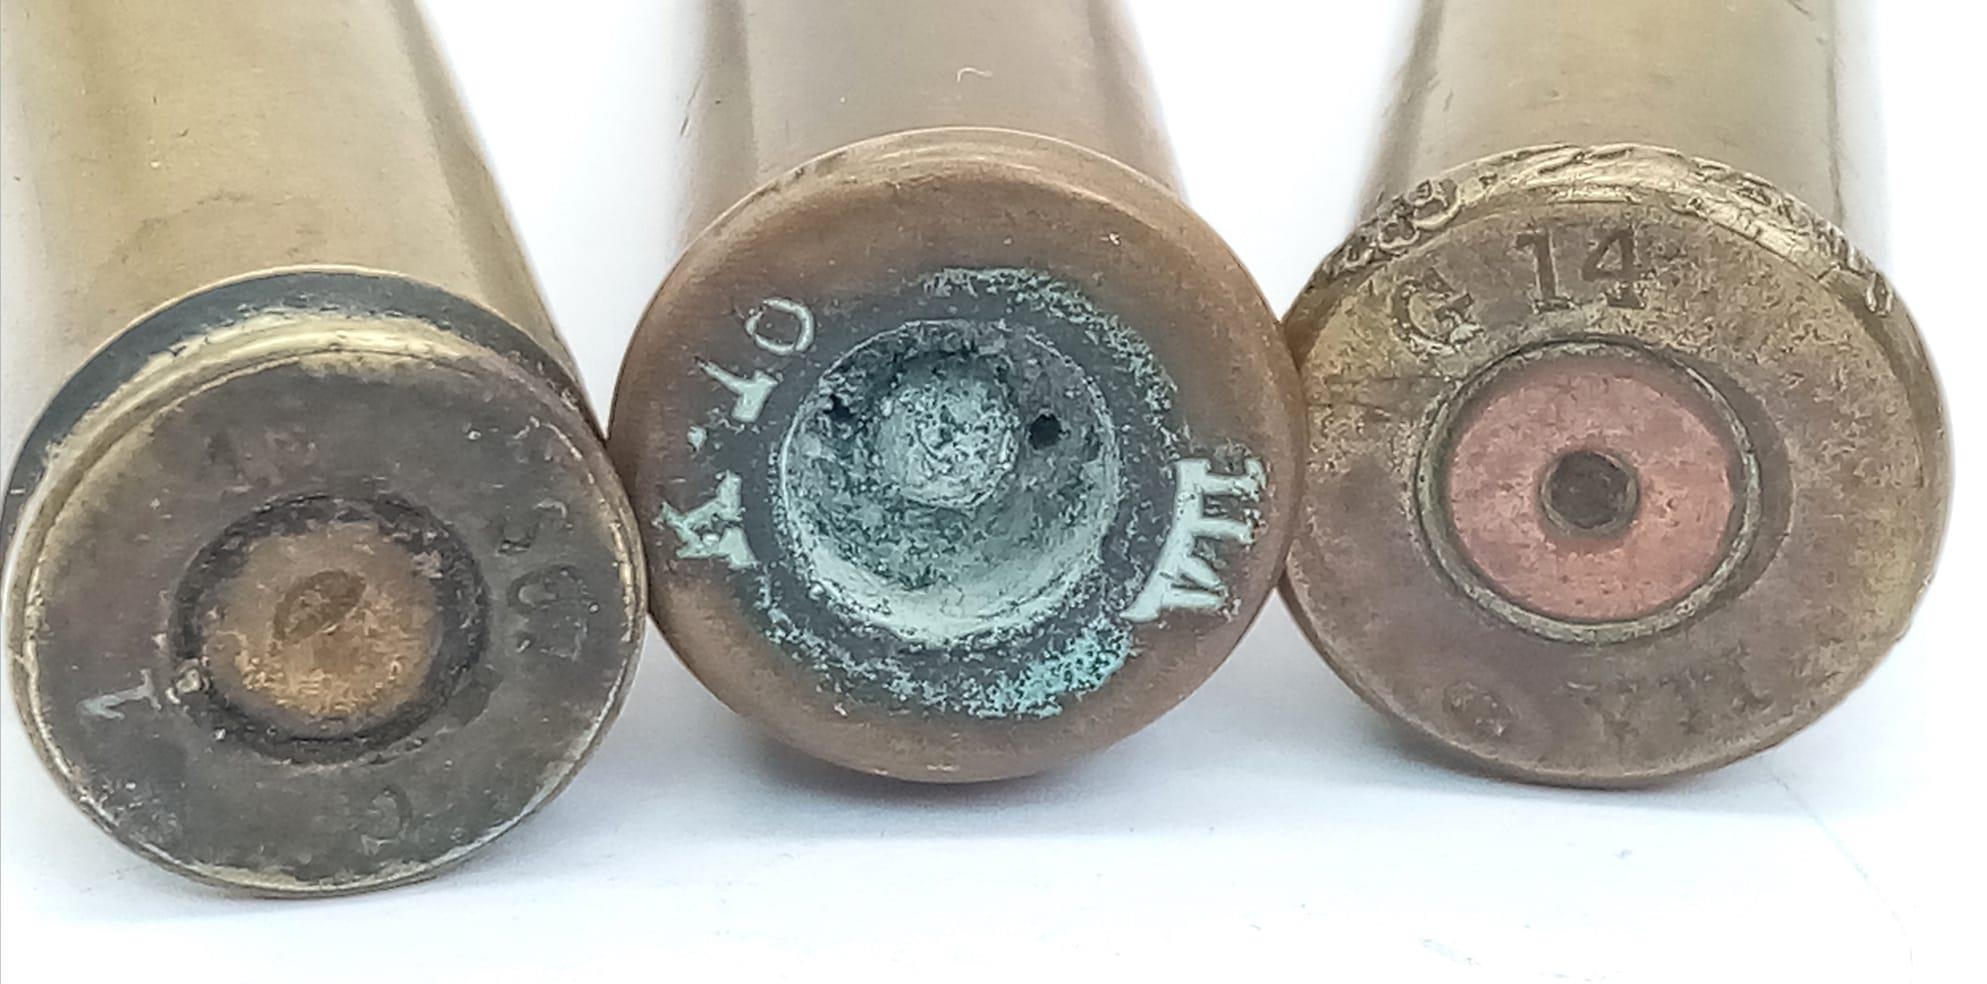 5 x WW1 Trench Art Letter Openers. Made from Inert Bullet Cases and Shell Case Brass. UK Mainland - Image 4 of 5